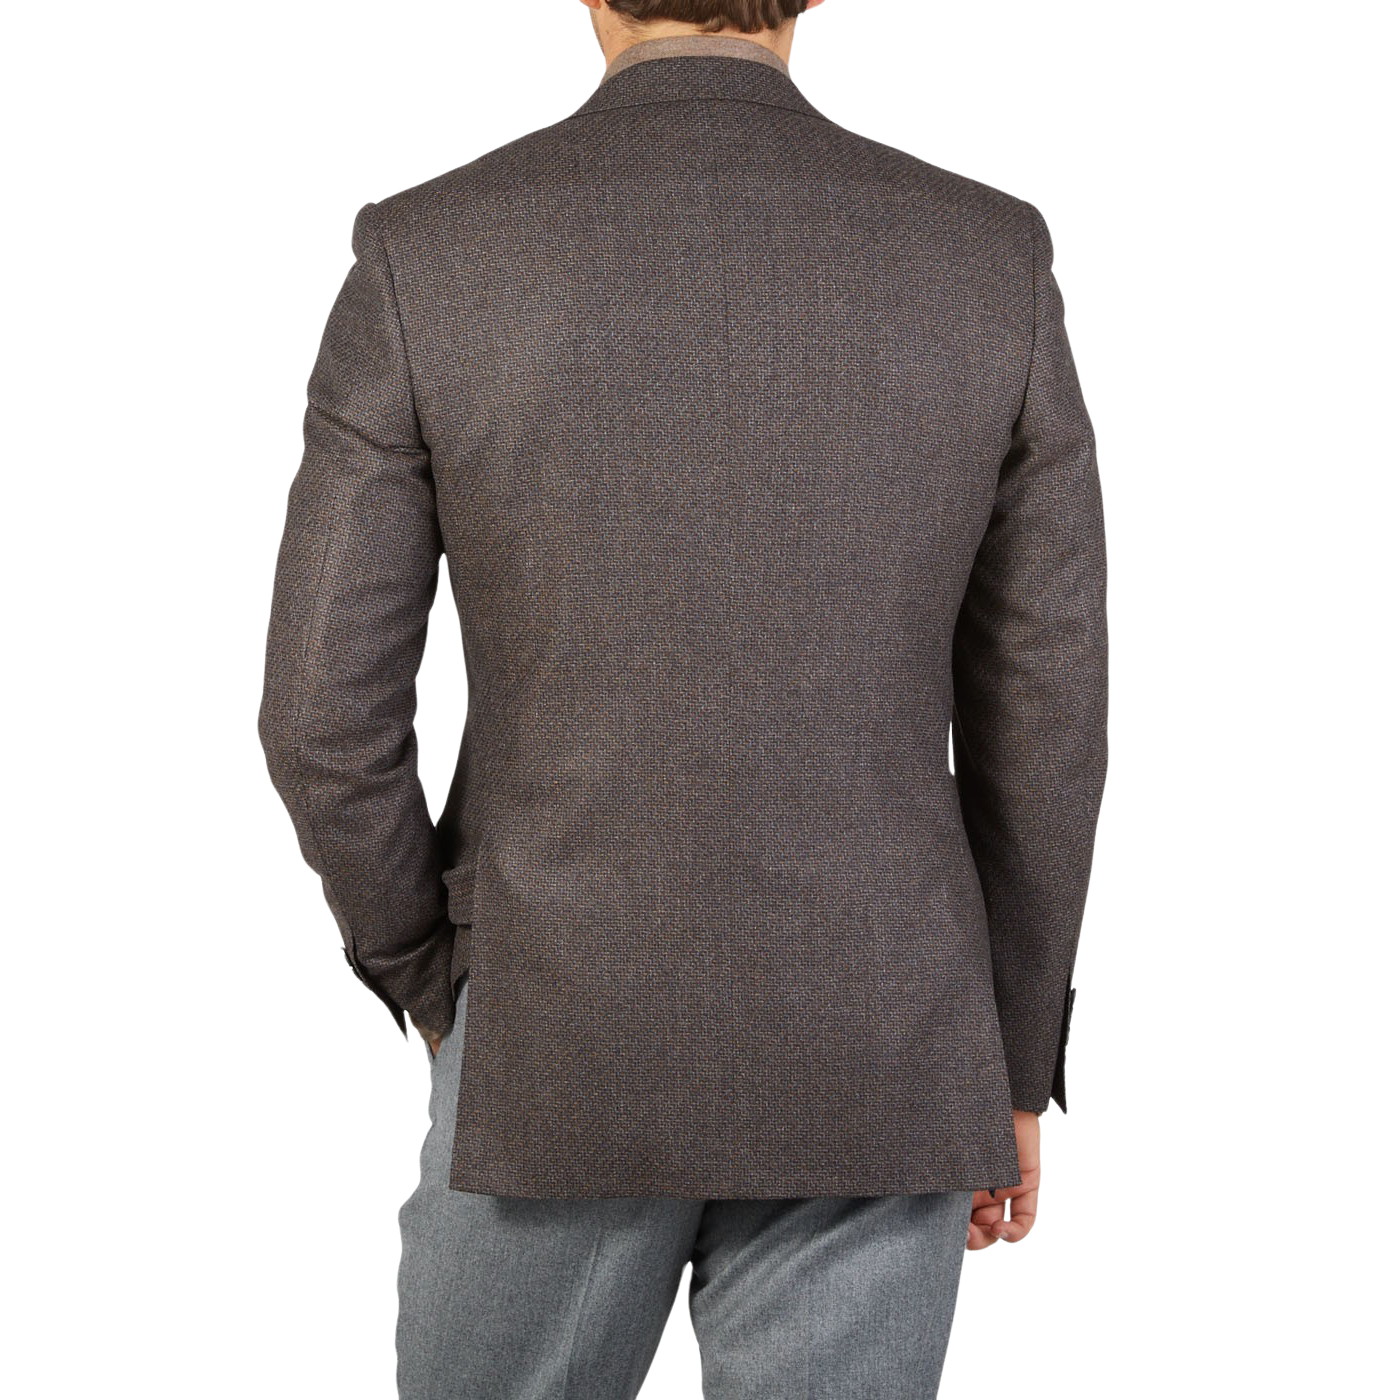 The back view of a man wearing a Canali Brown Grey Zig Zag Wool Drop 6 Blazer.